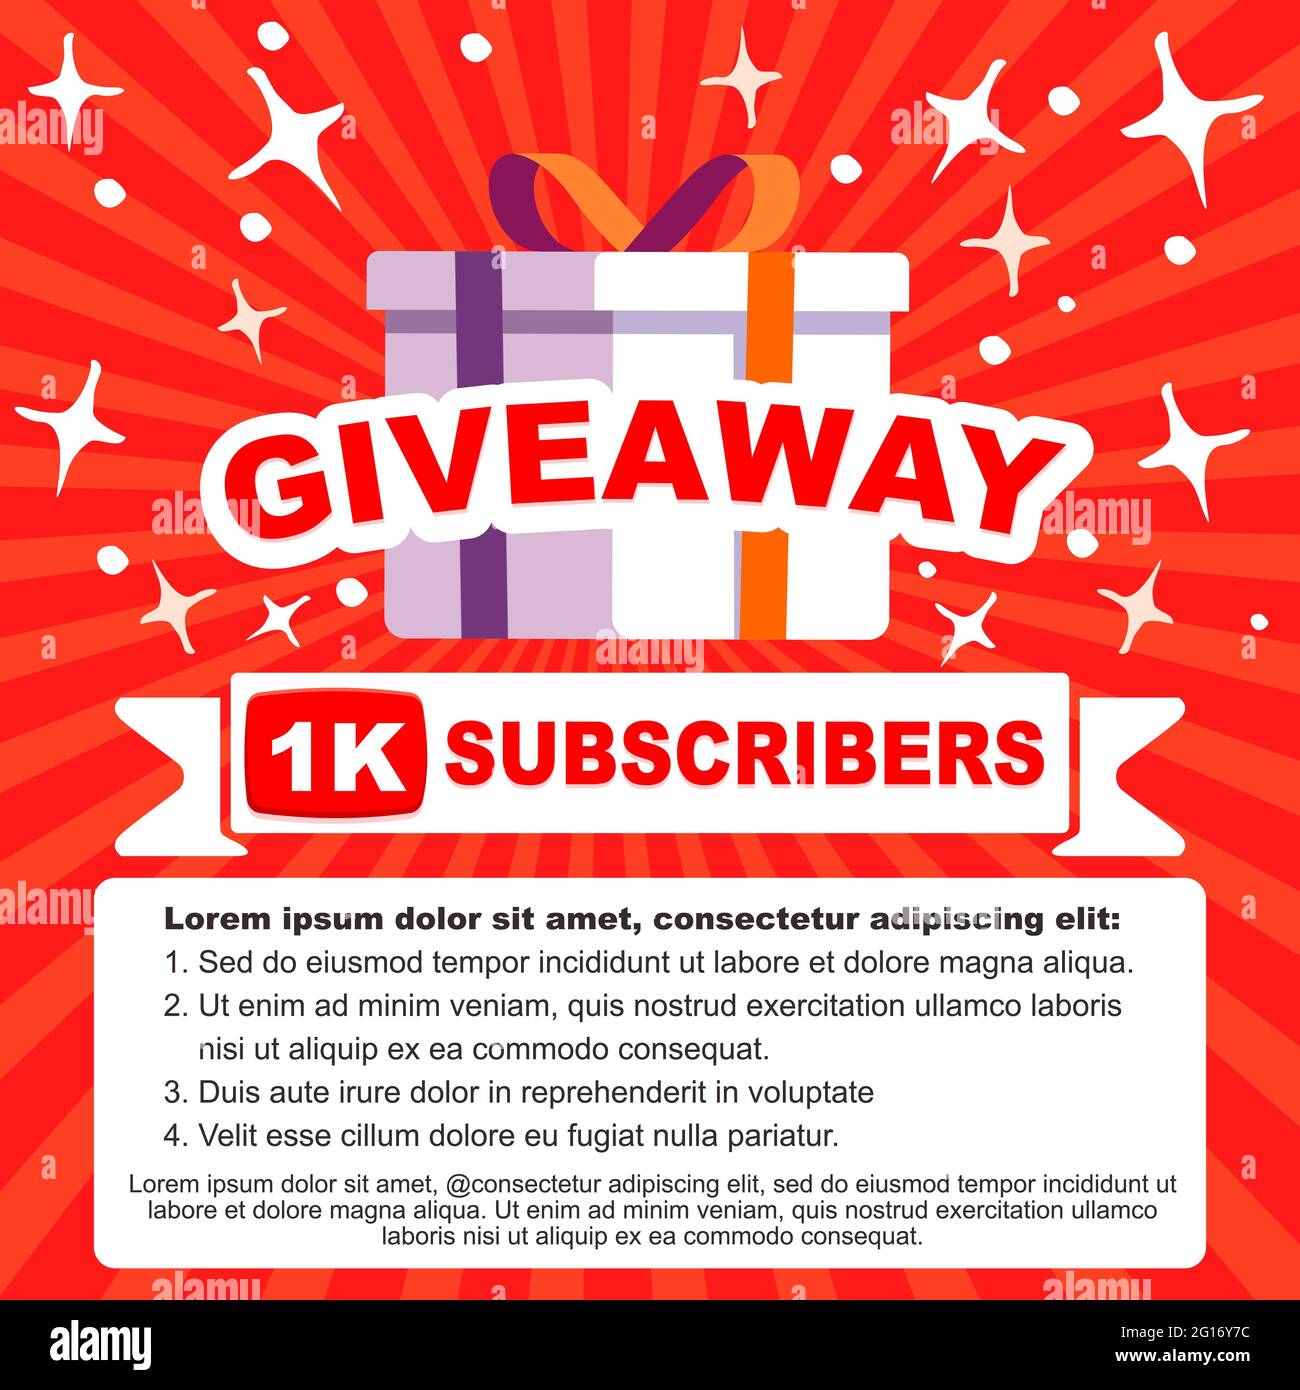 giveaway 1K (1000) video vlog subcribers. gift box above text. template design for social media post or website banner. Clean illustration with modern Stock Vector